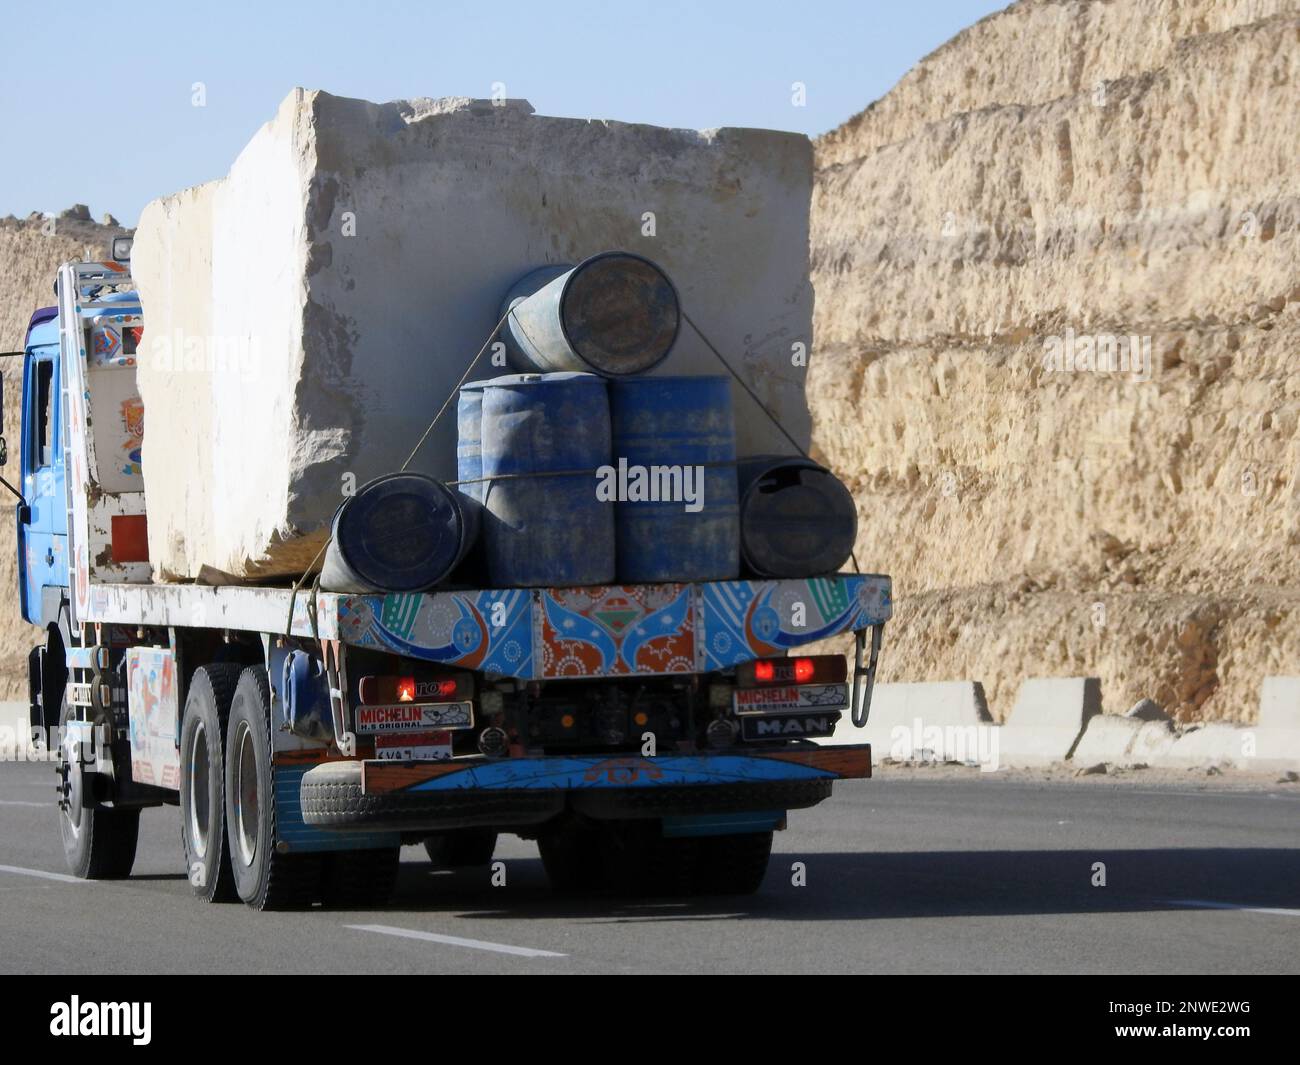 Giza, Egypt, January 26 2023: A big truck loaded with large blocks of stone, limestone, rocks taken from quarries in mountains being transferred on a Stock Photo